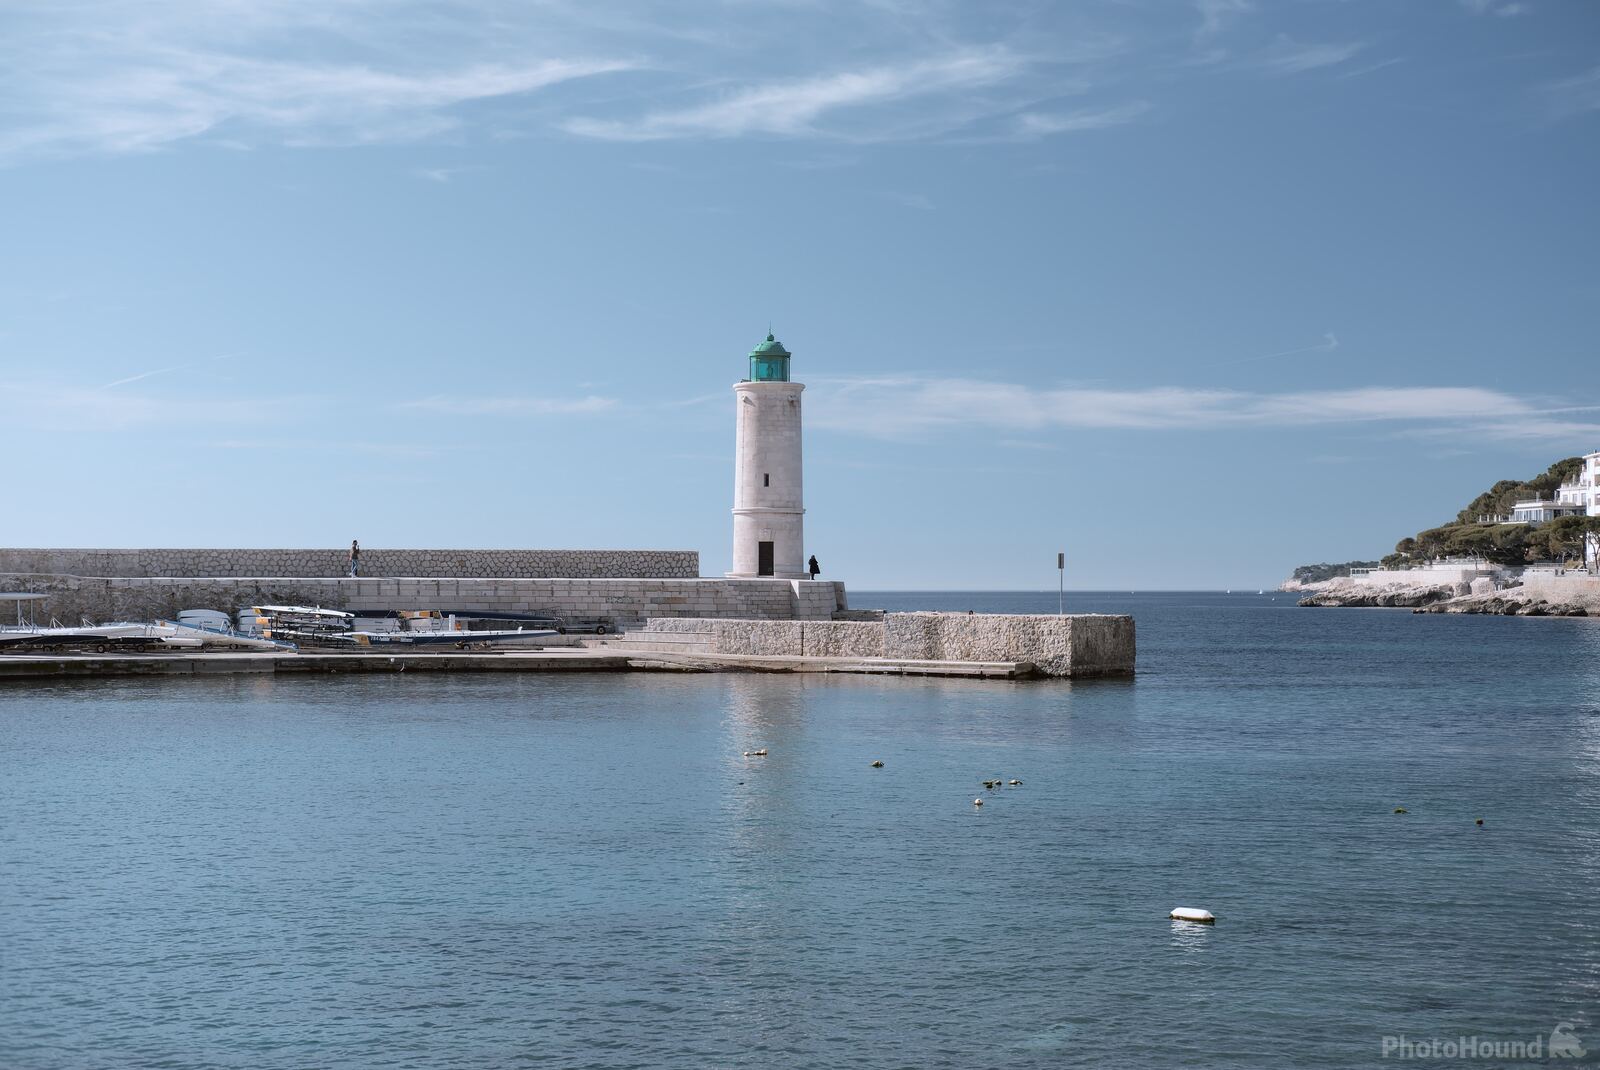 Image of Port of Cassis by Team PhotoHound